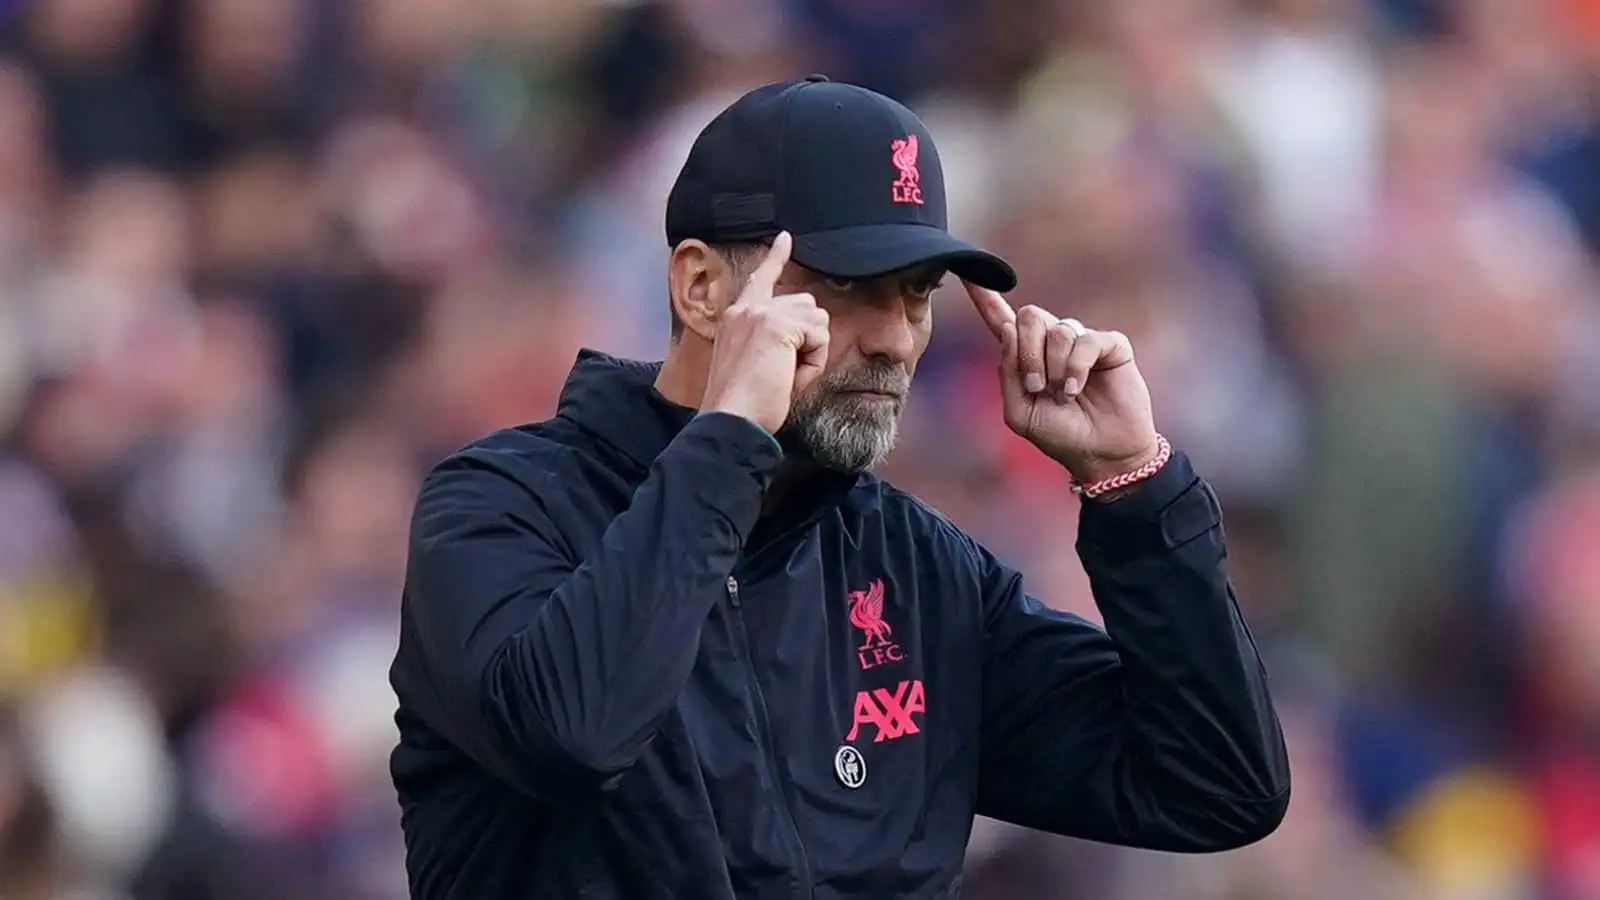 Jurgen Klopp calls player who could leave Liverpool ‘important’ after hinting at increase in gametime; plays down fresh injury concern